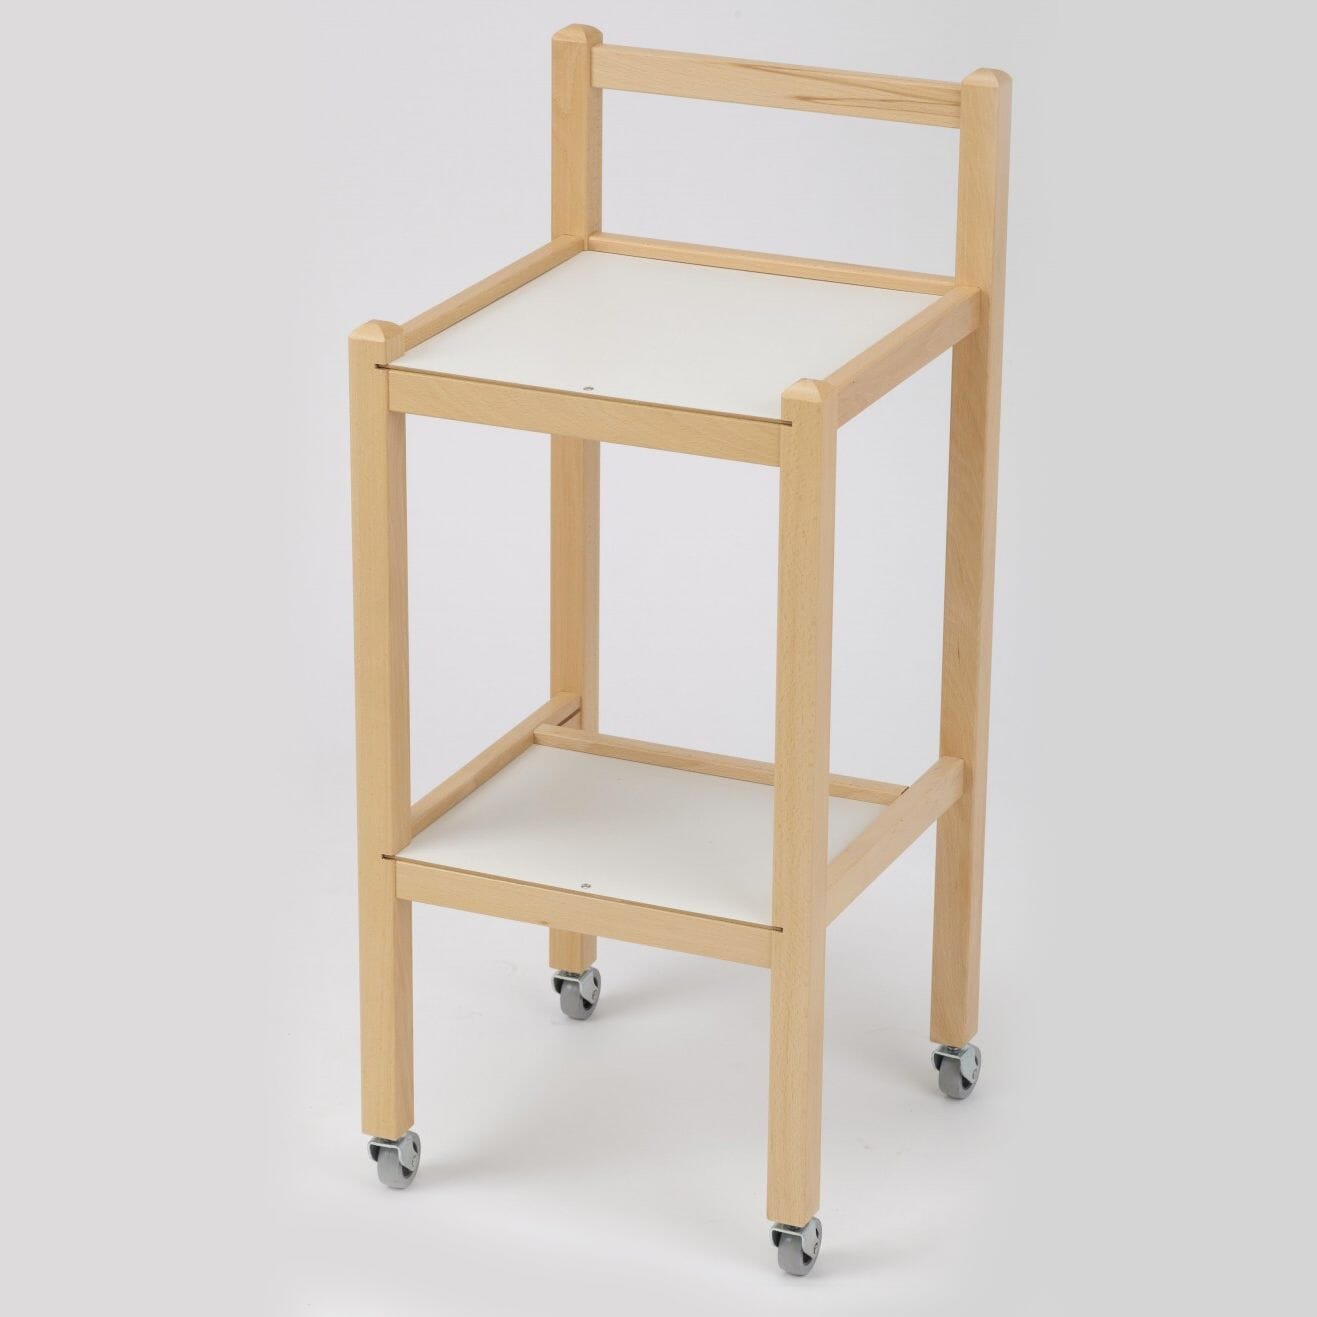 View Wooden Compact Trolley information